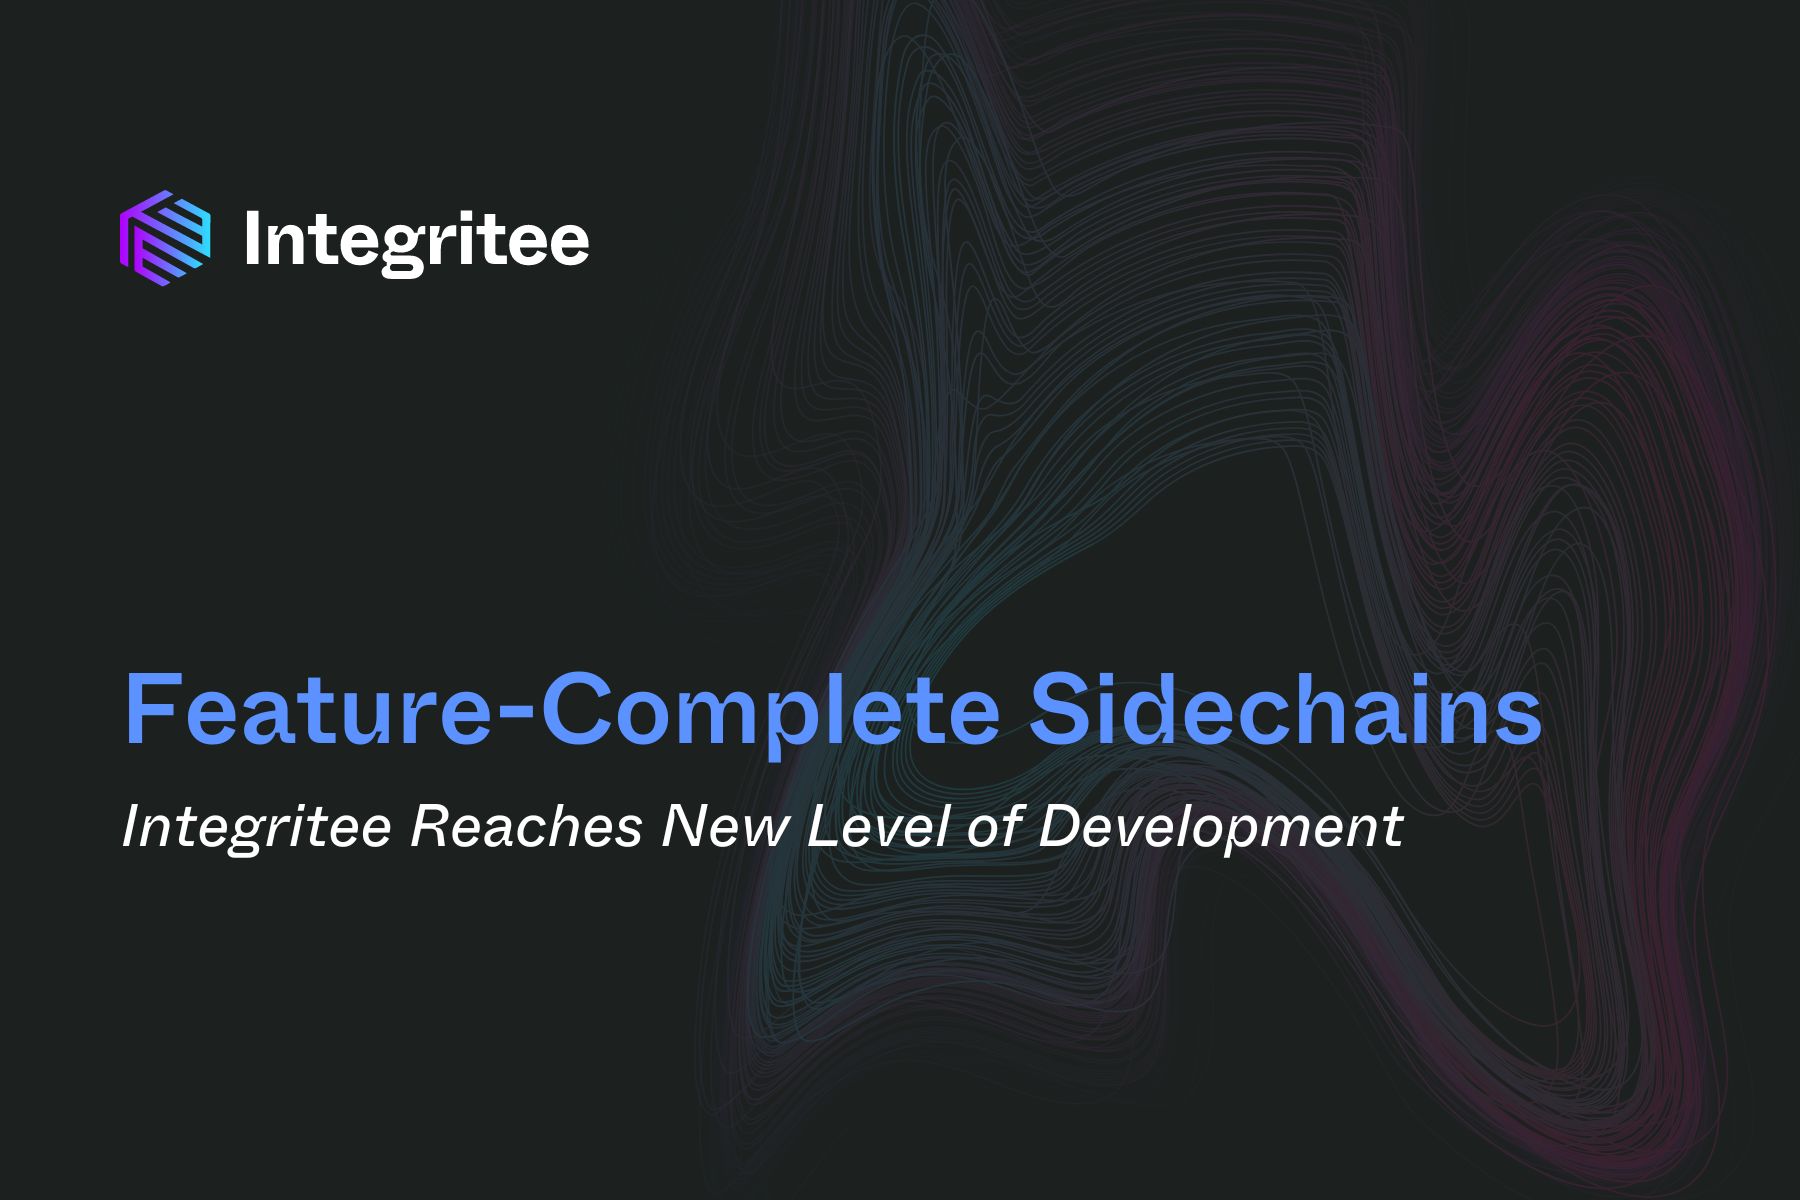 Integritee Achieves Feature-Complete Sidechains